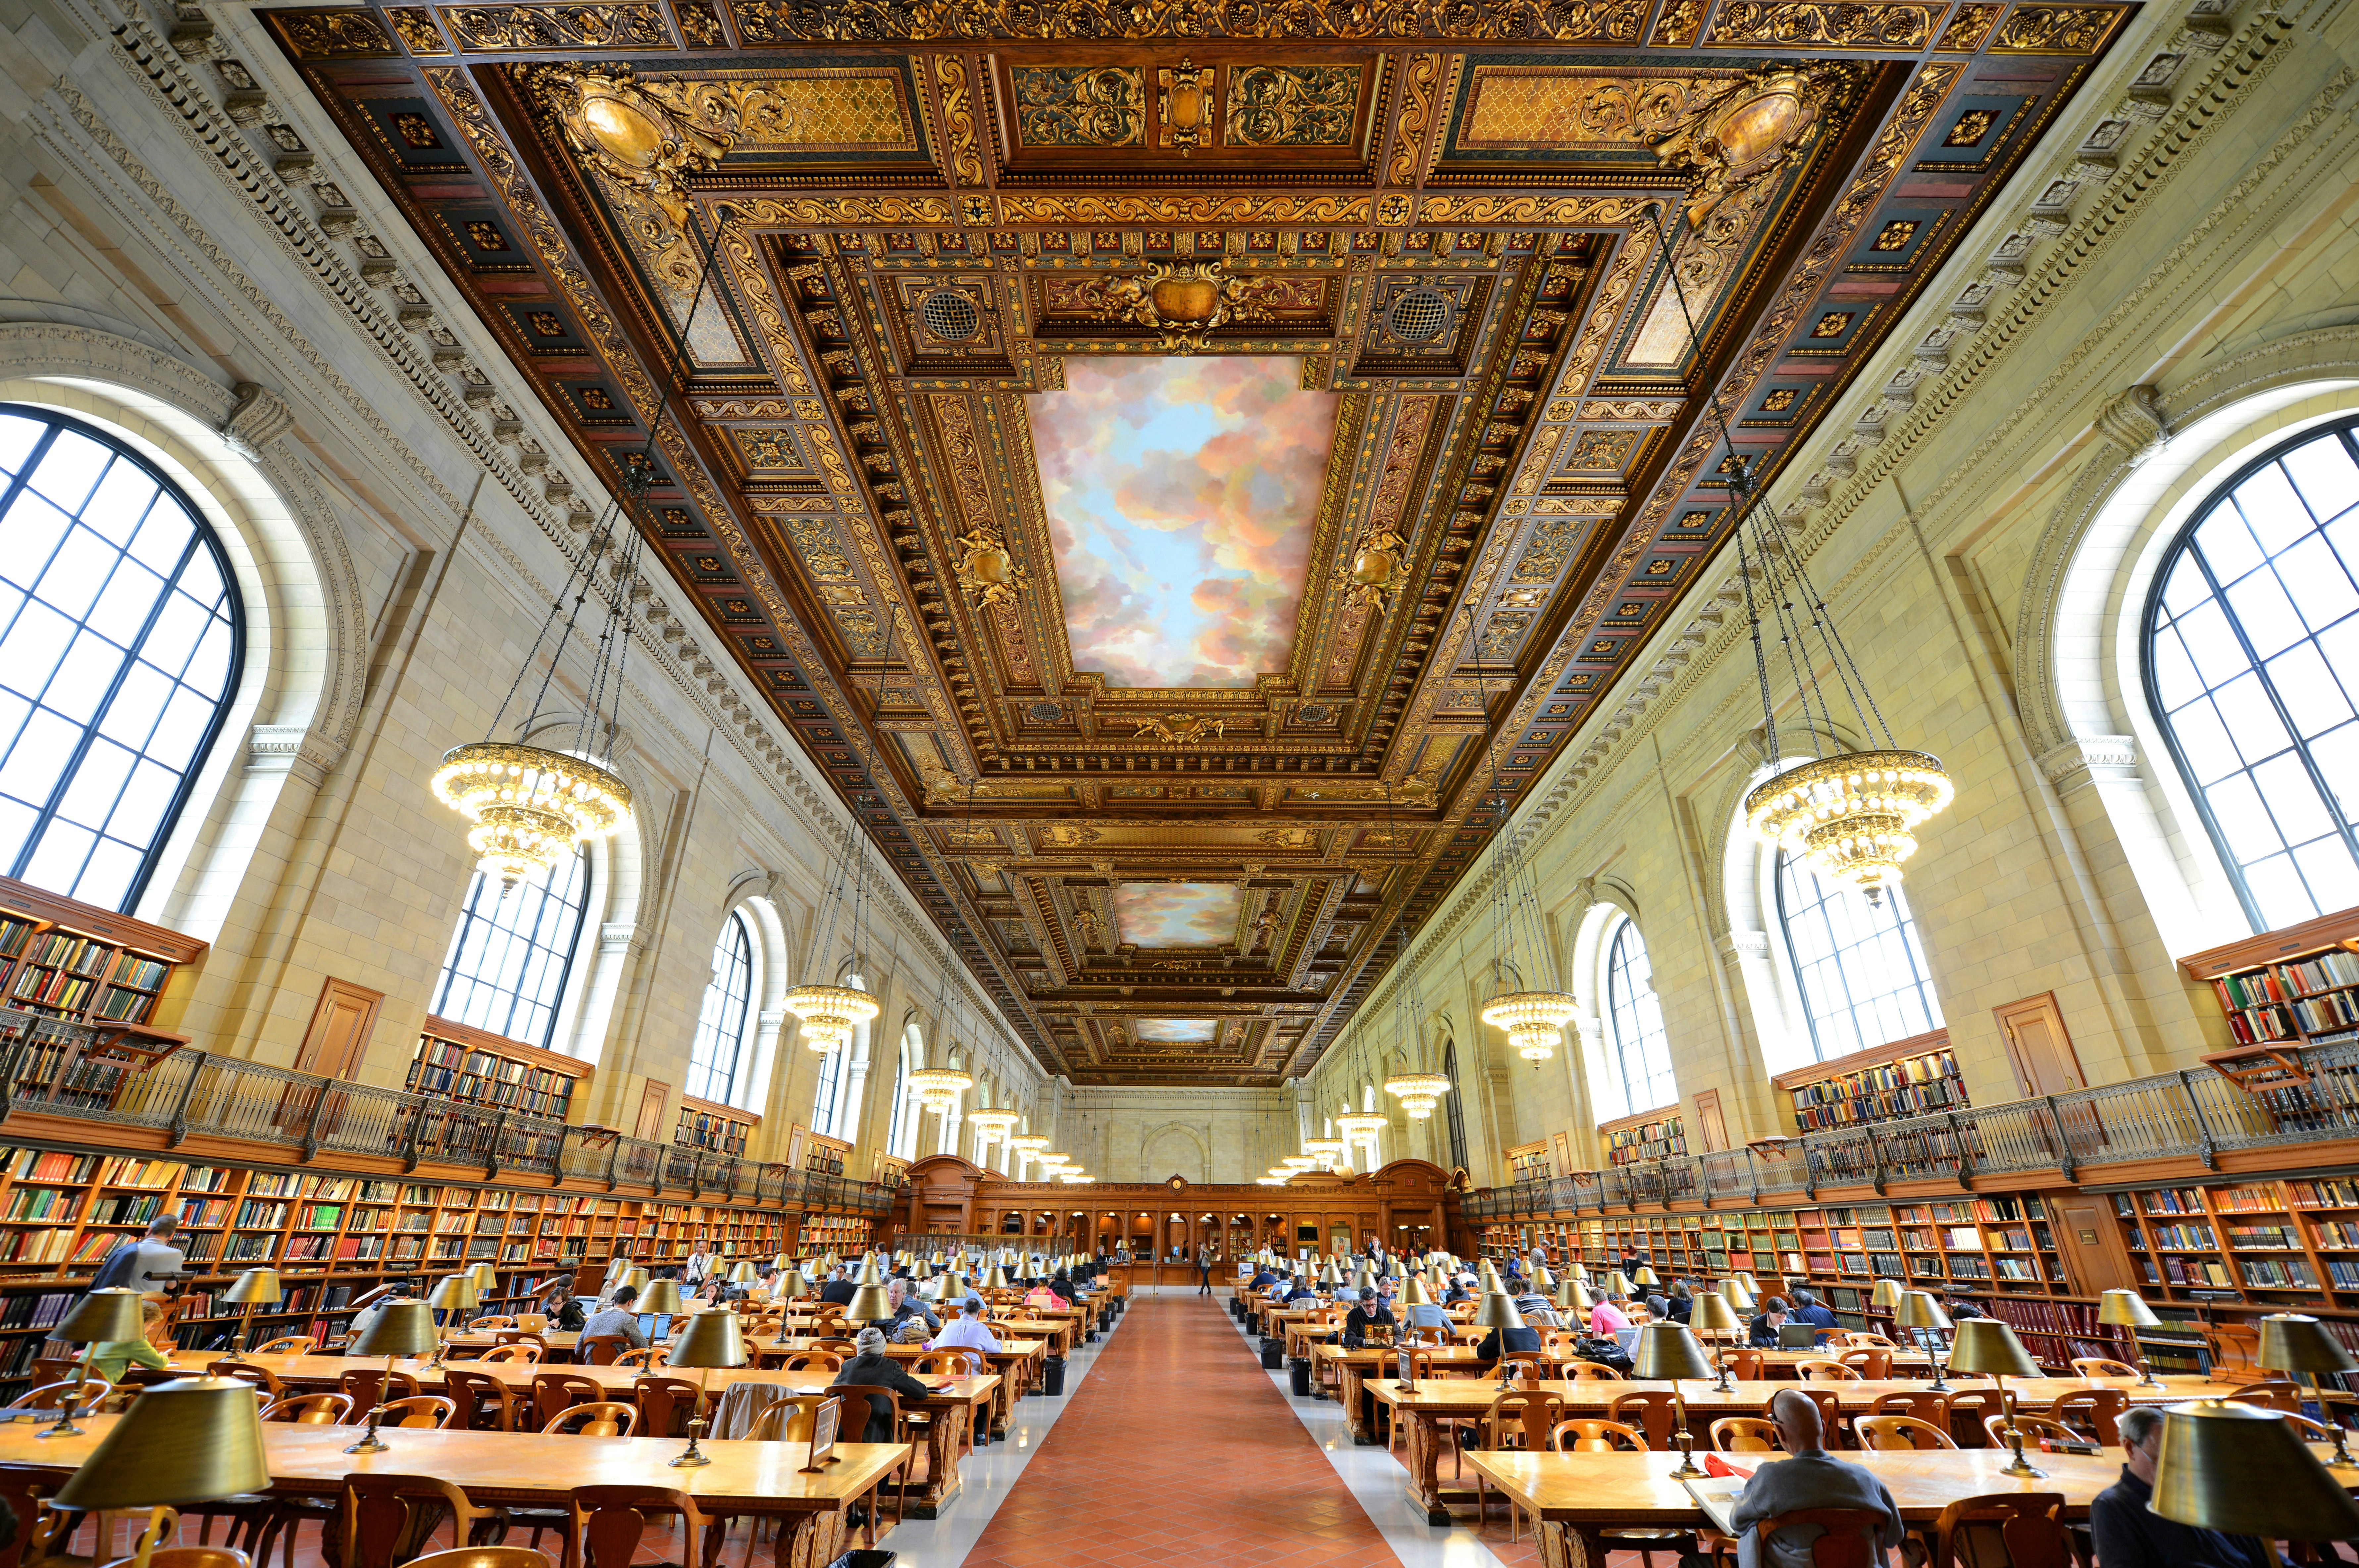 Interior shot of the expansive Rose Main Reading room at the New York Public Library. There are multiple wooden tables and a very ornate ceiling with large chandeliers.